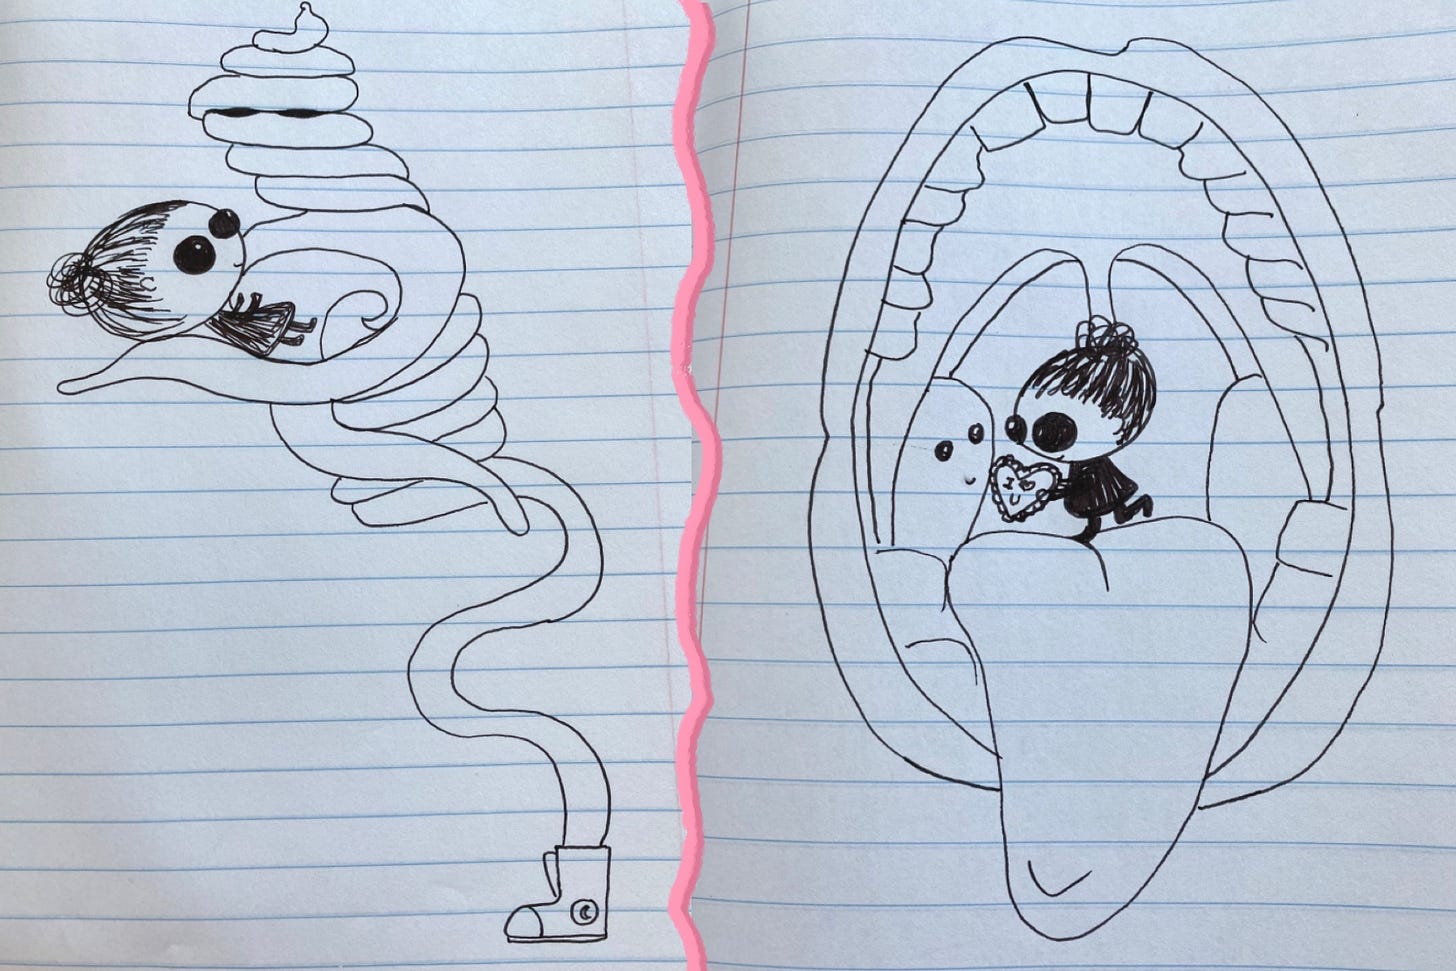 Two more ink drawings of the same big-headed, big-eyed figure from earlier. In one drawing, she is being carried like a baby by an enormous swirly alien. She looks up at the alien with awe. In the second drawing, the figure is tiny, standing on the tongue of a human mouth, looking elated, offering a box of chocolates to a bashful-looking tonsil.